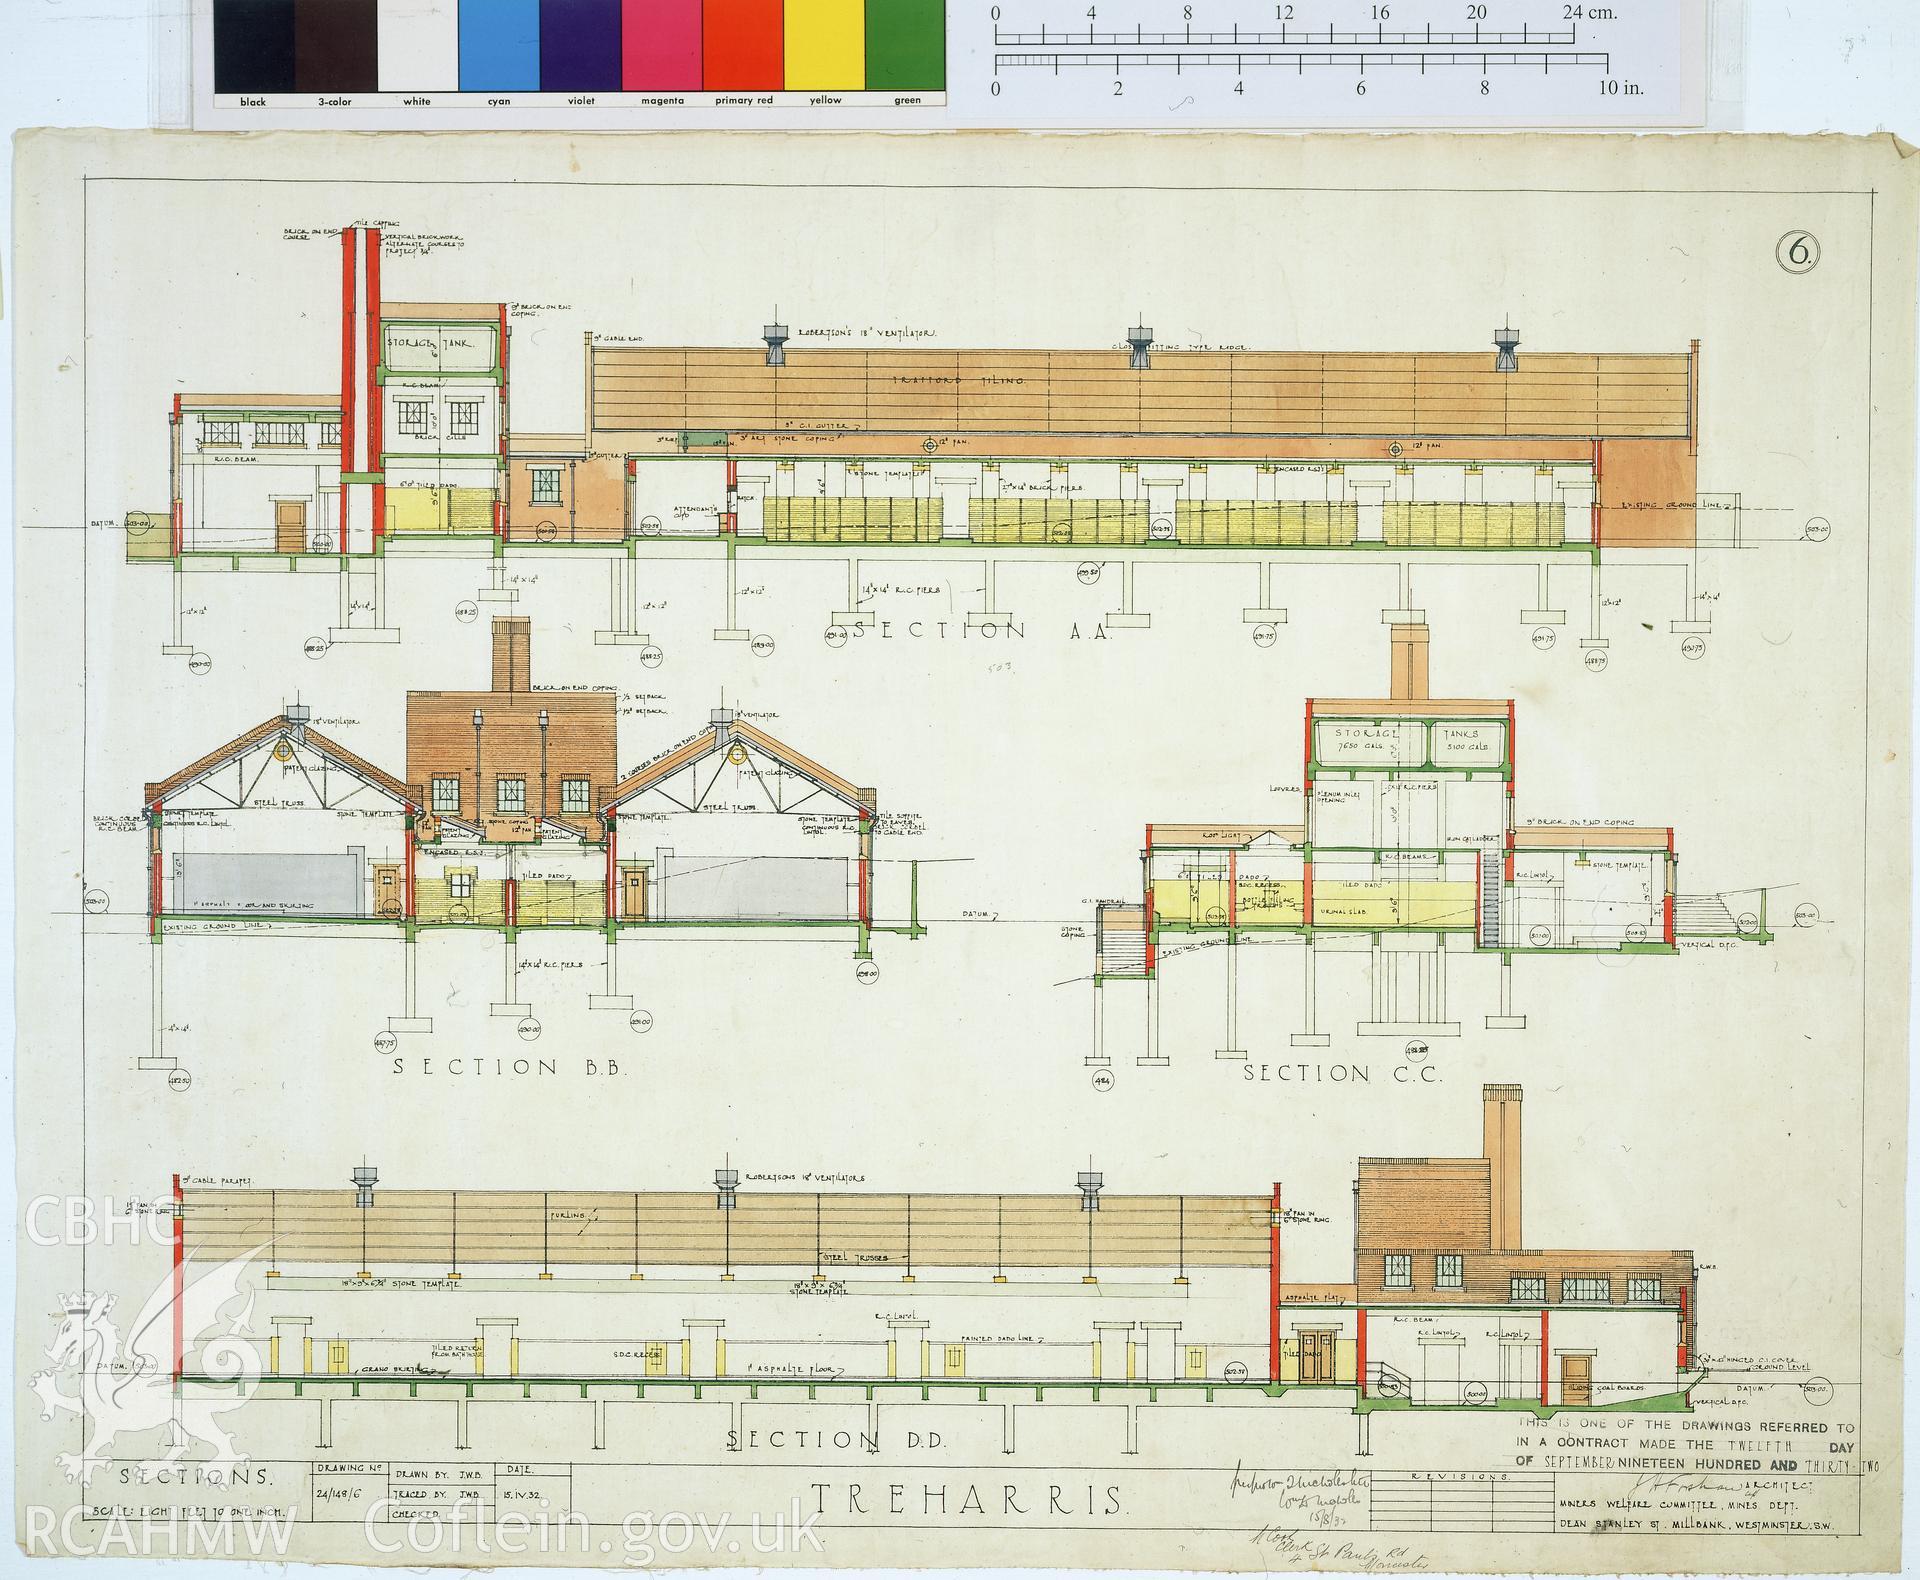 Colour transparency of a measured drawing showing section views of the Bath House at  Ocean Deep Navigation Colliery , by J.H. Forshaw, Architect, 1932, from originals currently held by Gwent Record Office pending distribution to relevant county.